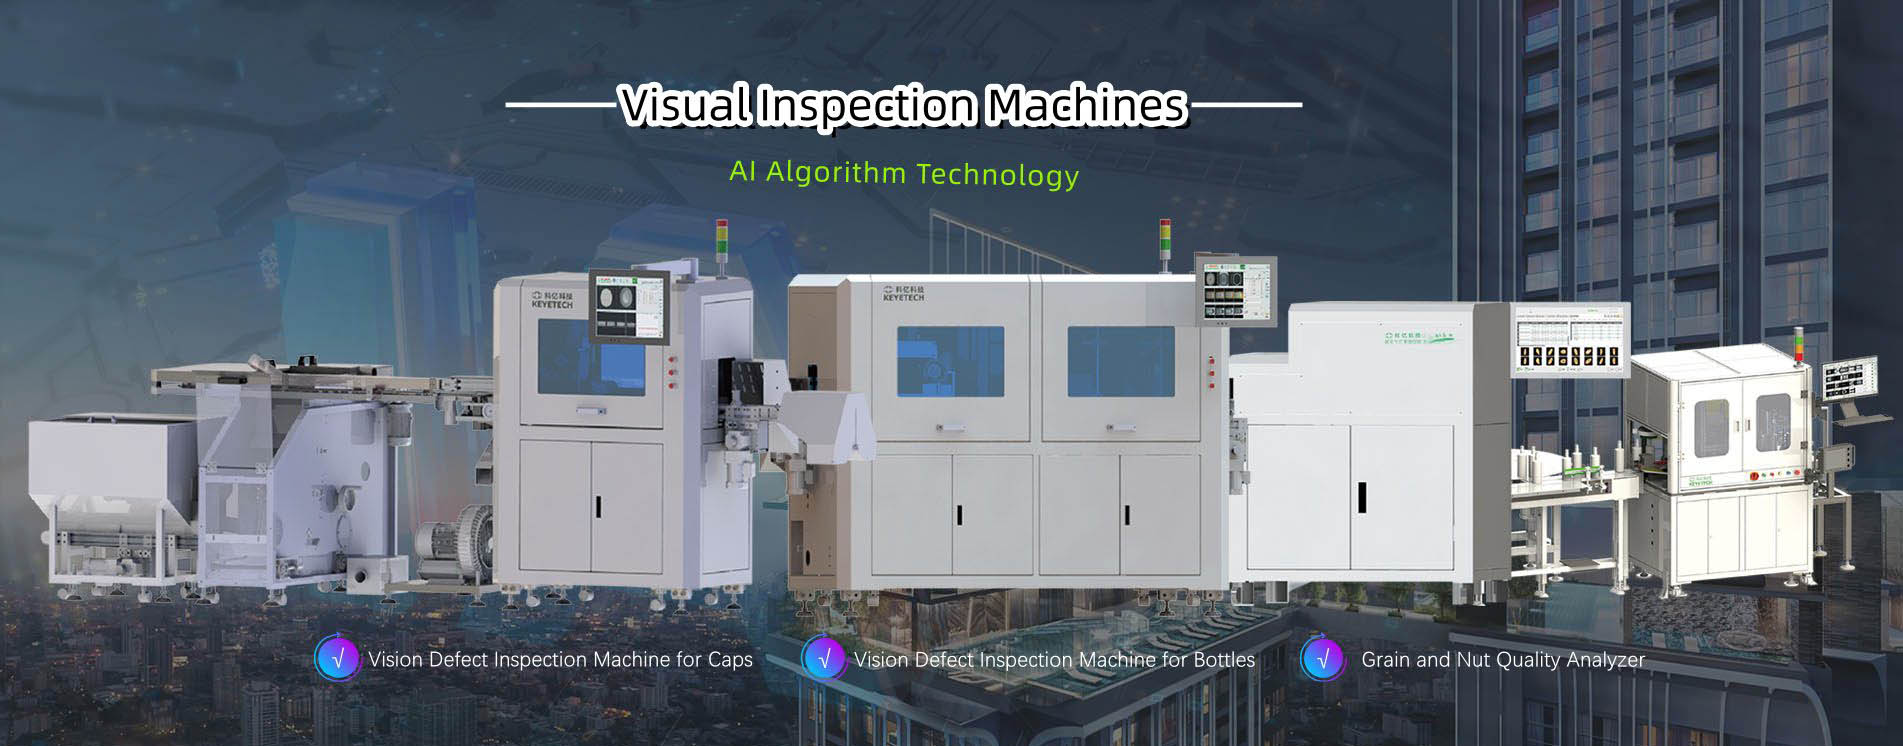 Visual Inspection Machines